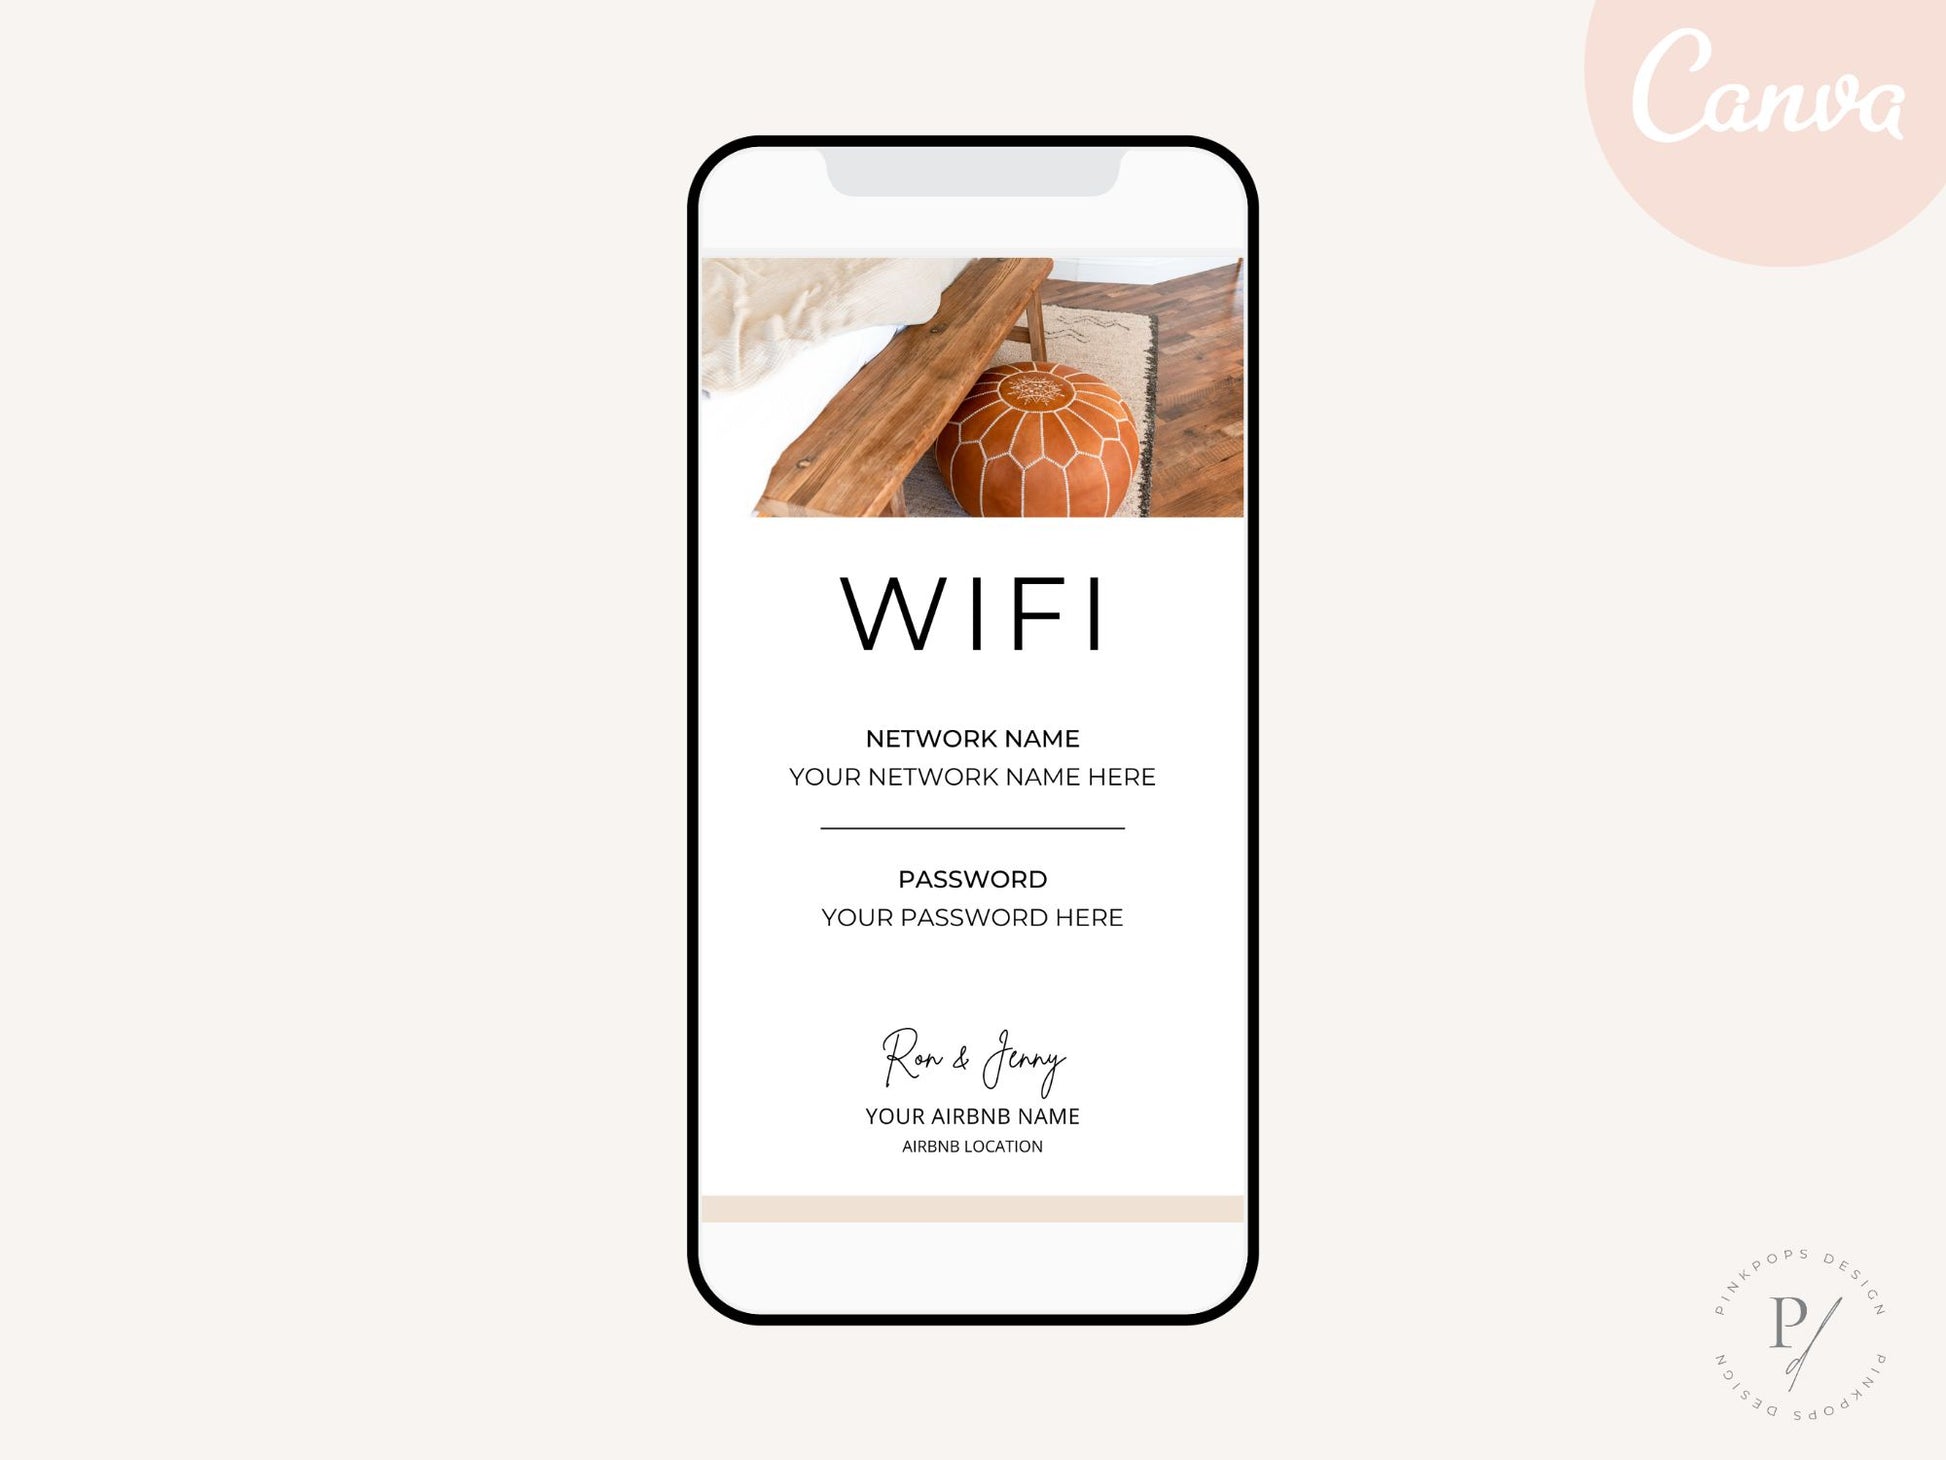 Textable Airbnb WiFi Password - Editable and digital template for seamless guest connectivity in your vacation rental.